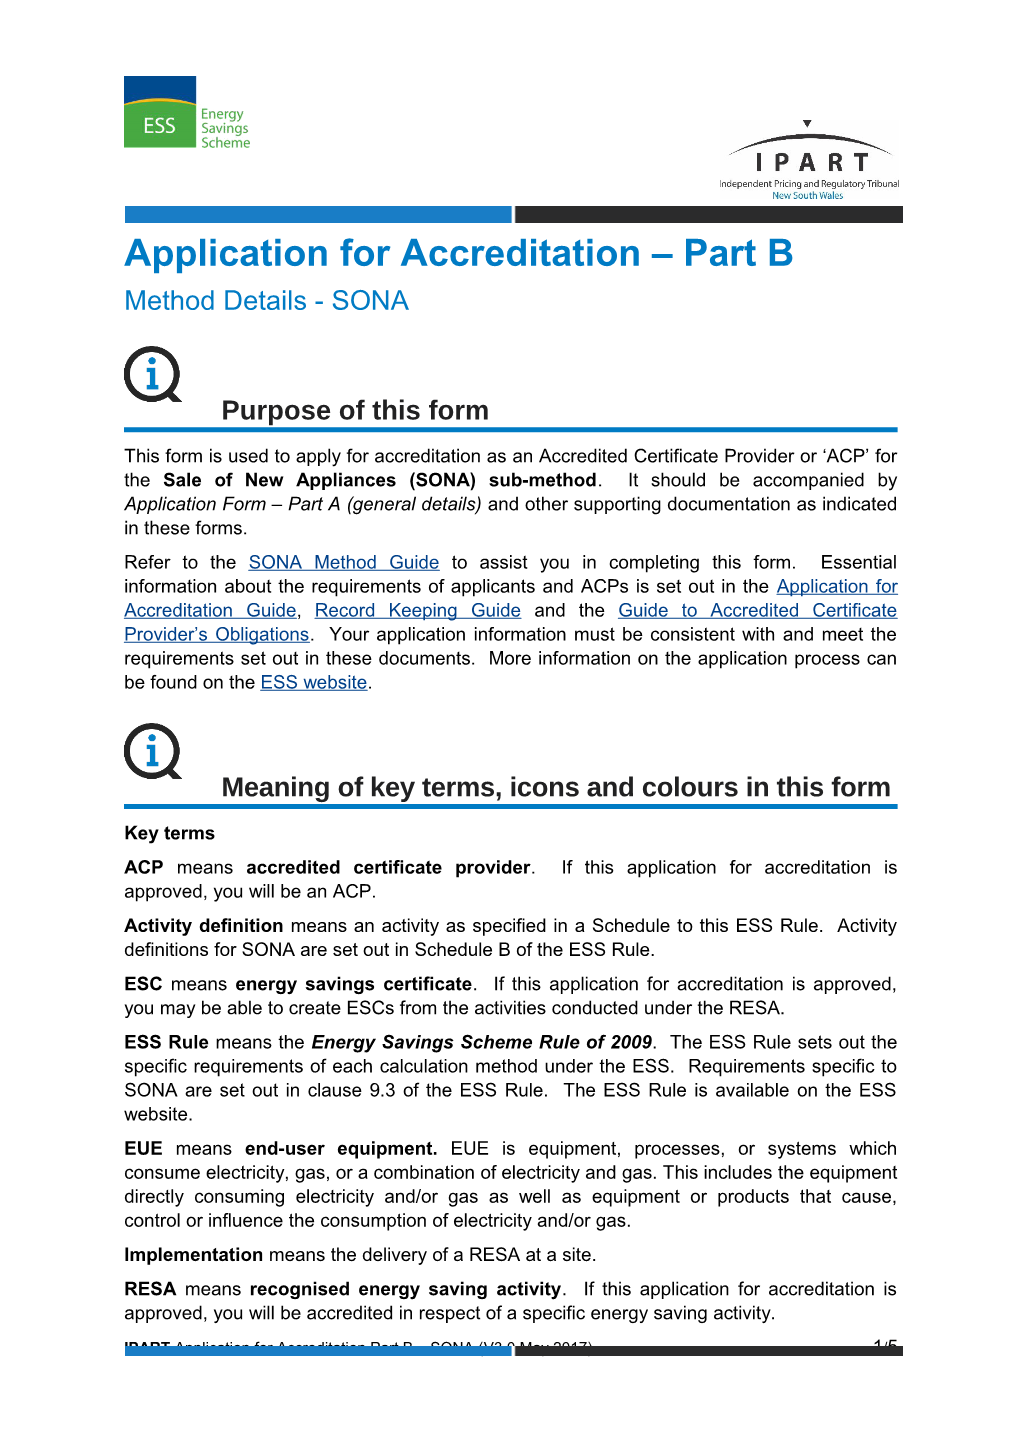 Application for Accreditation Part B